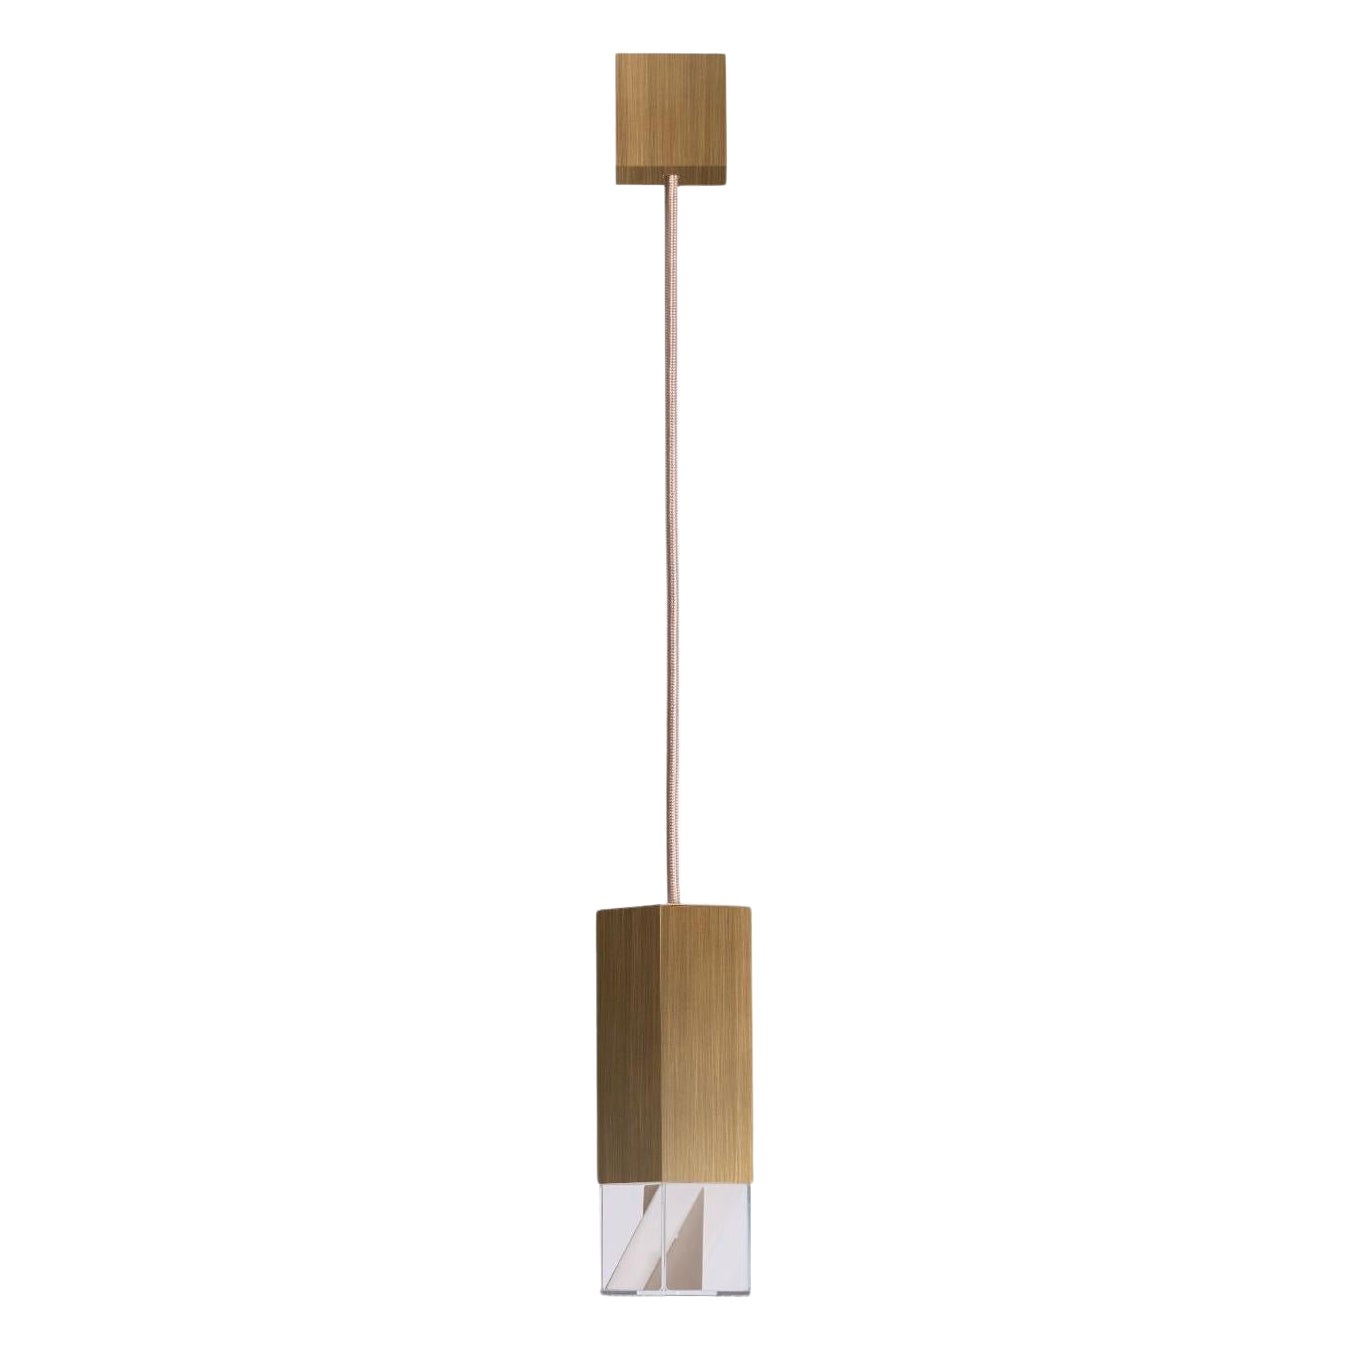 Lamp One Brass 01 Revamp Edition by Formaminima For Sale